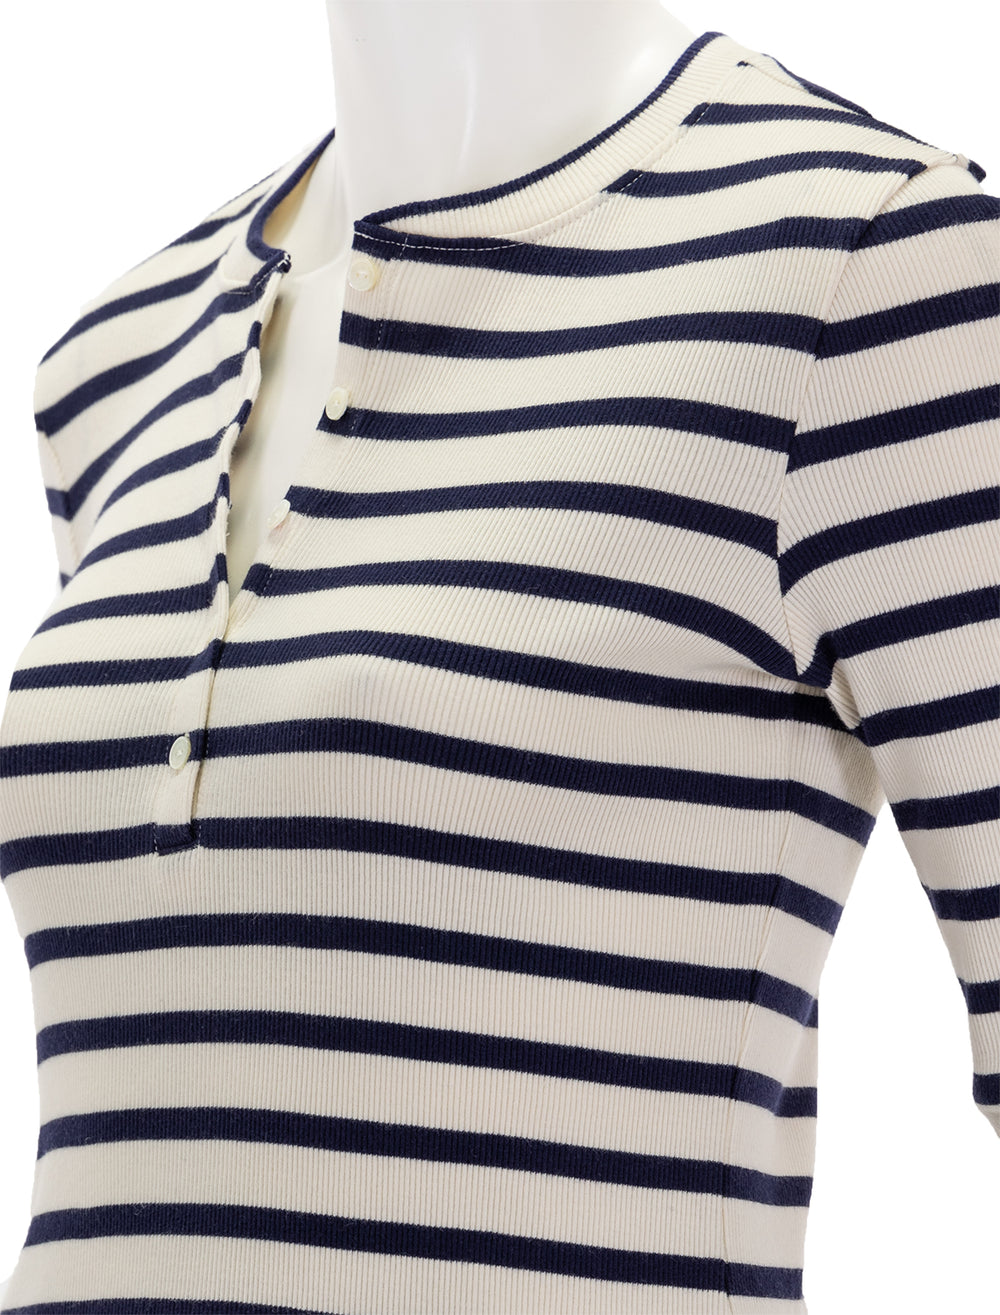 Close-up view of Nili Lotan's jordan henley tee in ivory and navy stripe.